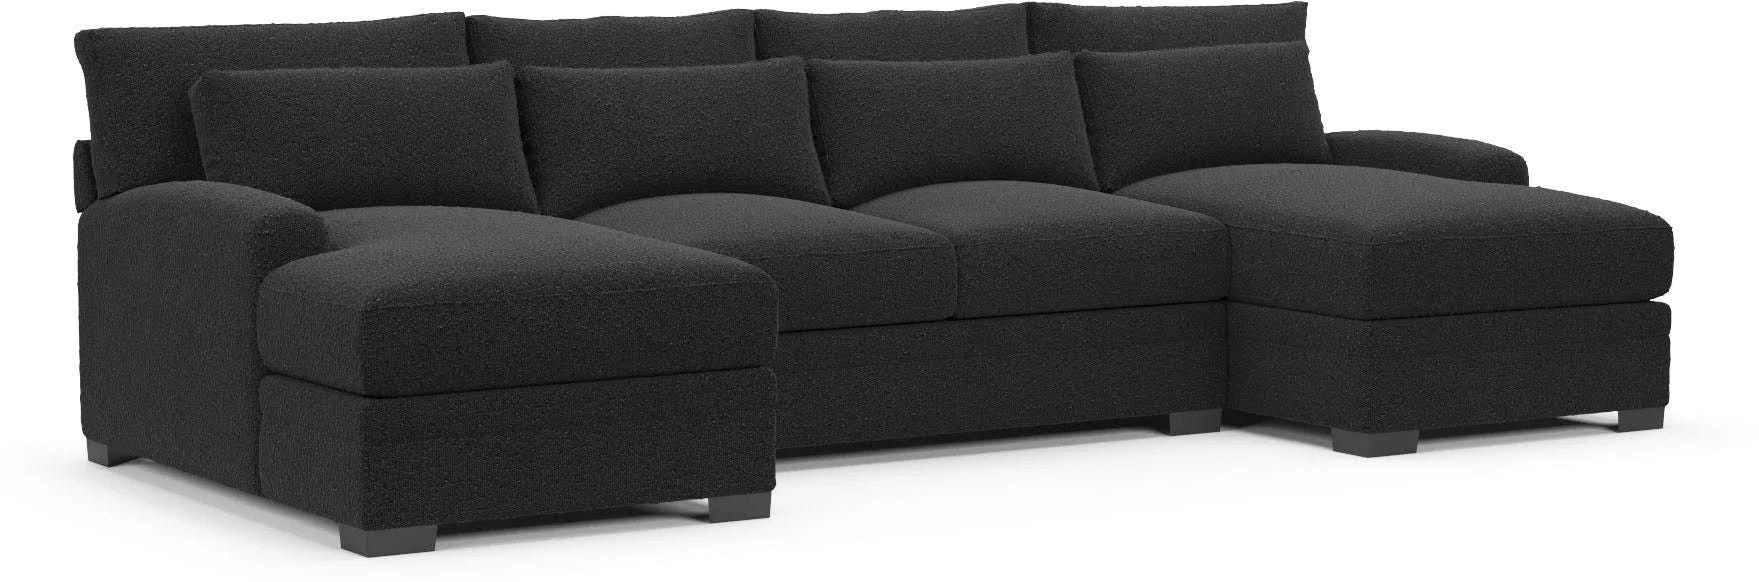 Indulgent Obsidian Winston Comfort 3-Piece Sectional with Dual Chaise | Image